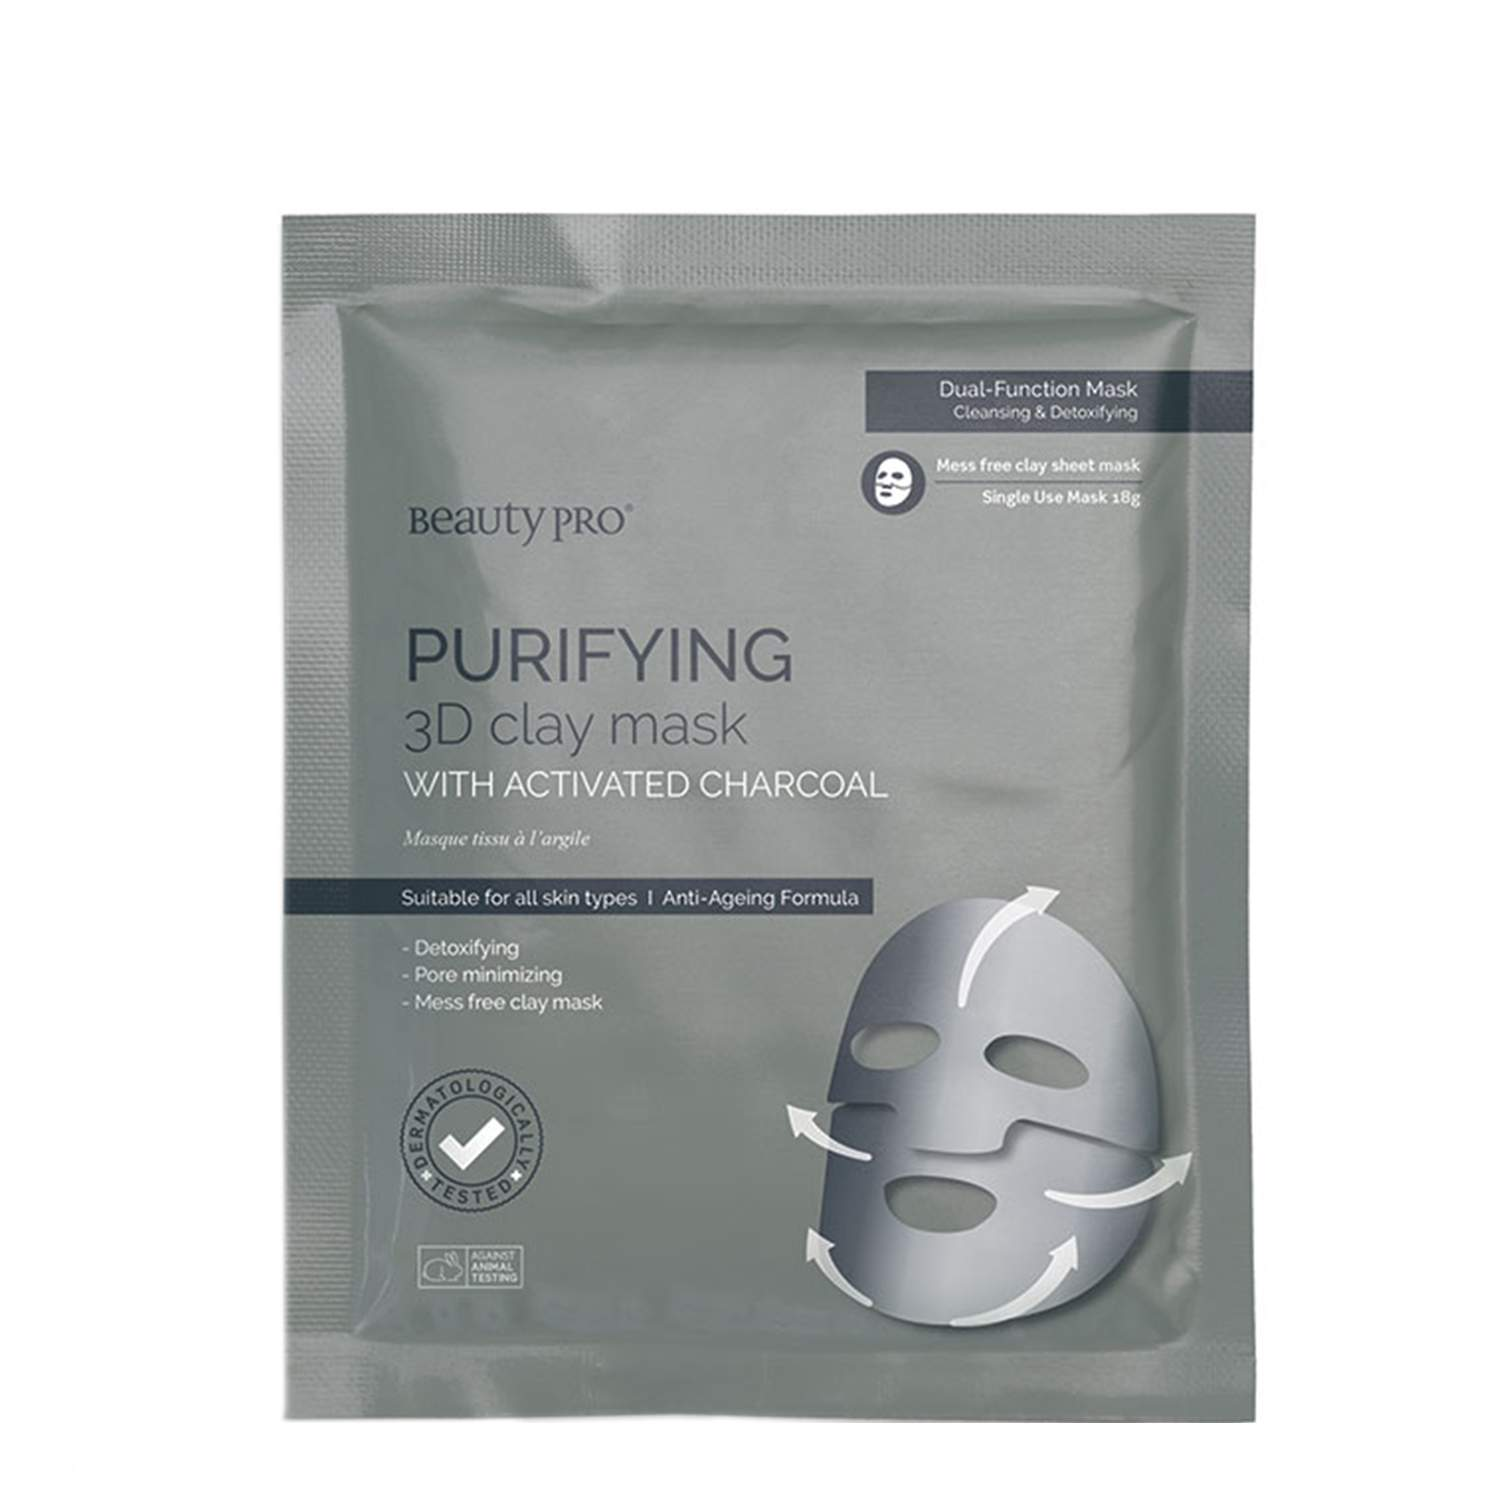 BeautyPro PURIFYING 3D Clay Mask with Activated Charcoal BeautyPro PURIFYING 3D Clay Mask with Activated Charcoal 1